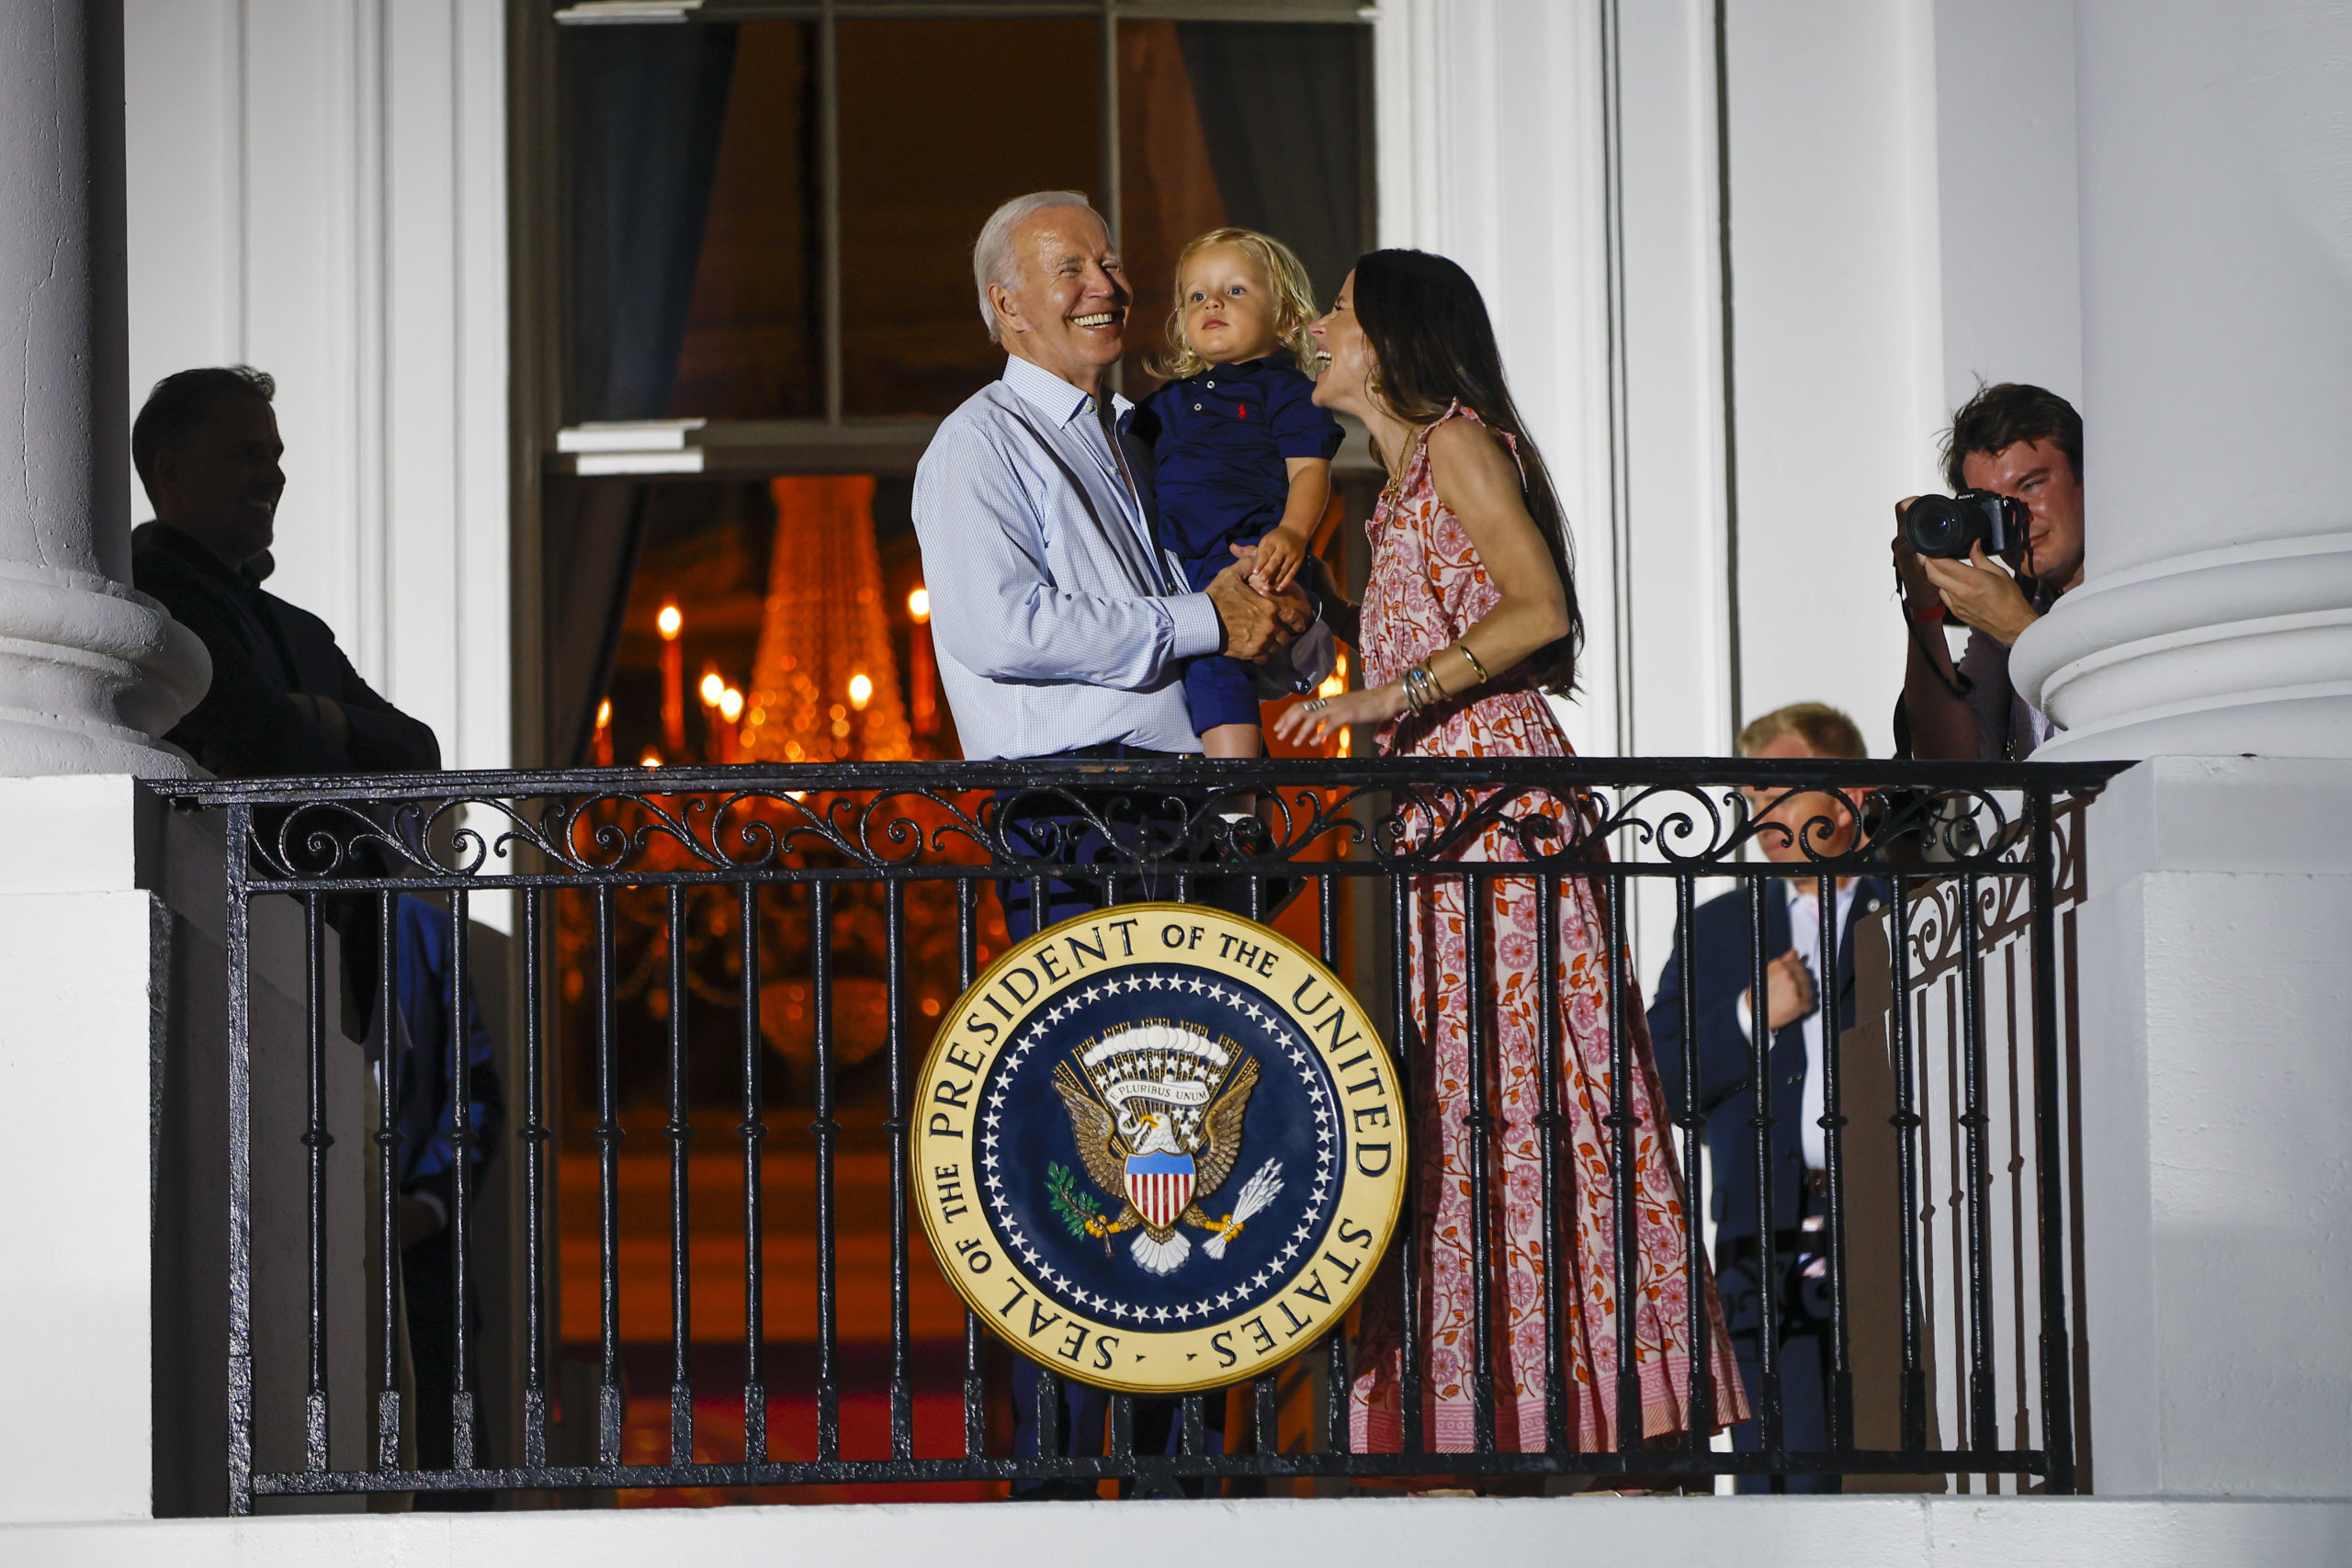 U.S. President Joe Biden, his grandson Beau Biden and Ashley Biden watch fireworks go off on national mall from the White House on July 04, 2022 in Washington, DC. The president and first lady Jill Biden hosted a Fourth of July BBQ and concert with military families and other guests on the south lawn of the White House. (Photo by Tasos Katopodis/Getty Images)